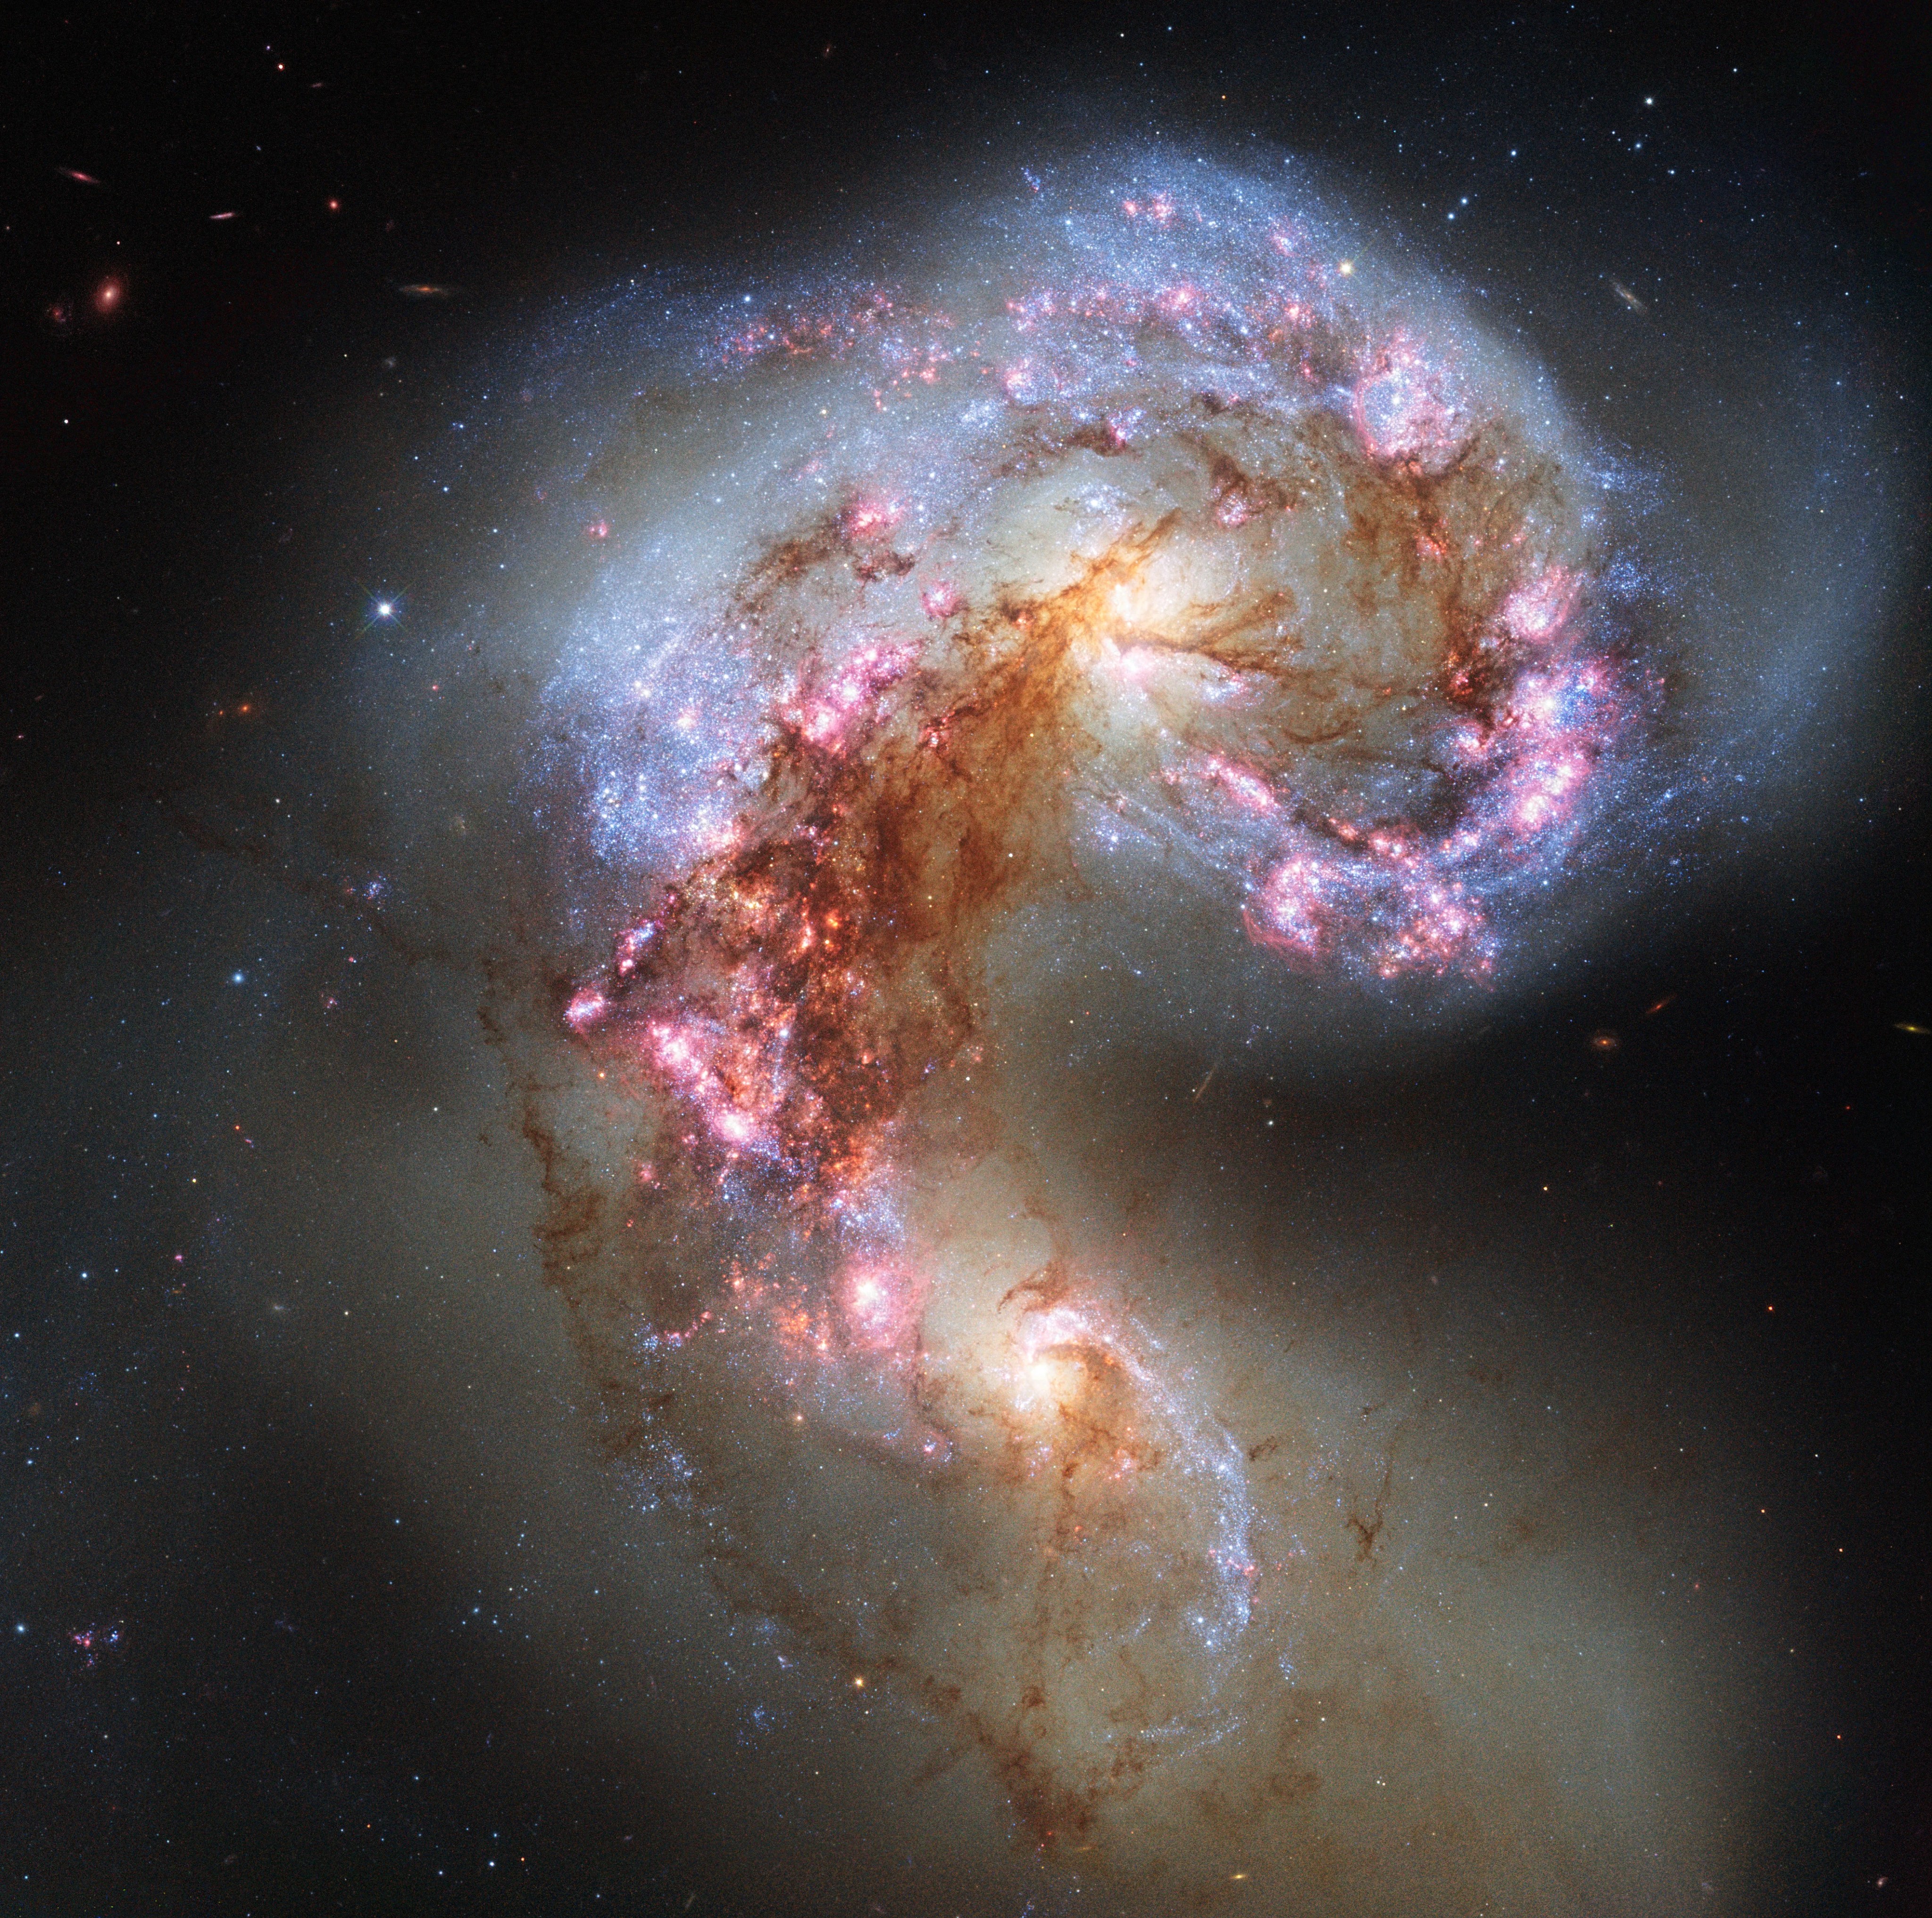 Comma shaped curved cloud of gases in bright white edged with bright-pink star forming regions, and threaded with rusty-brown tendrils of dust at center and throughout the comma shaped merger. All set against the black of deep space.